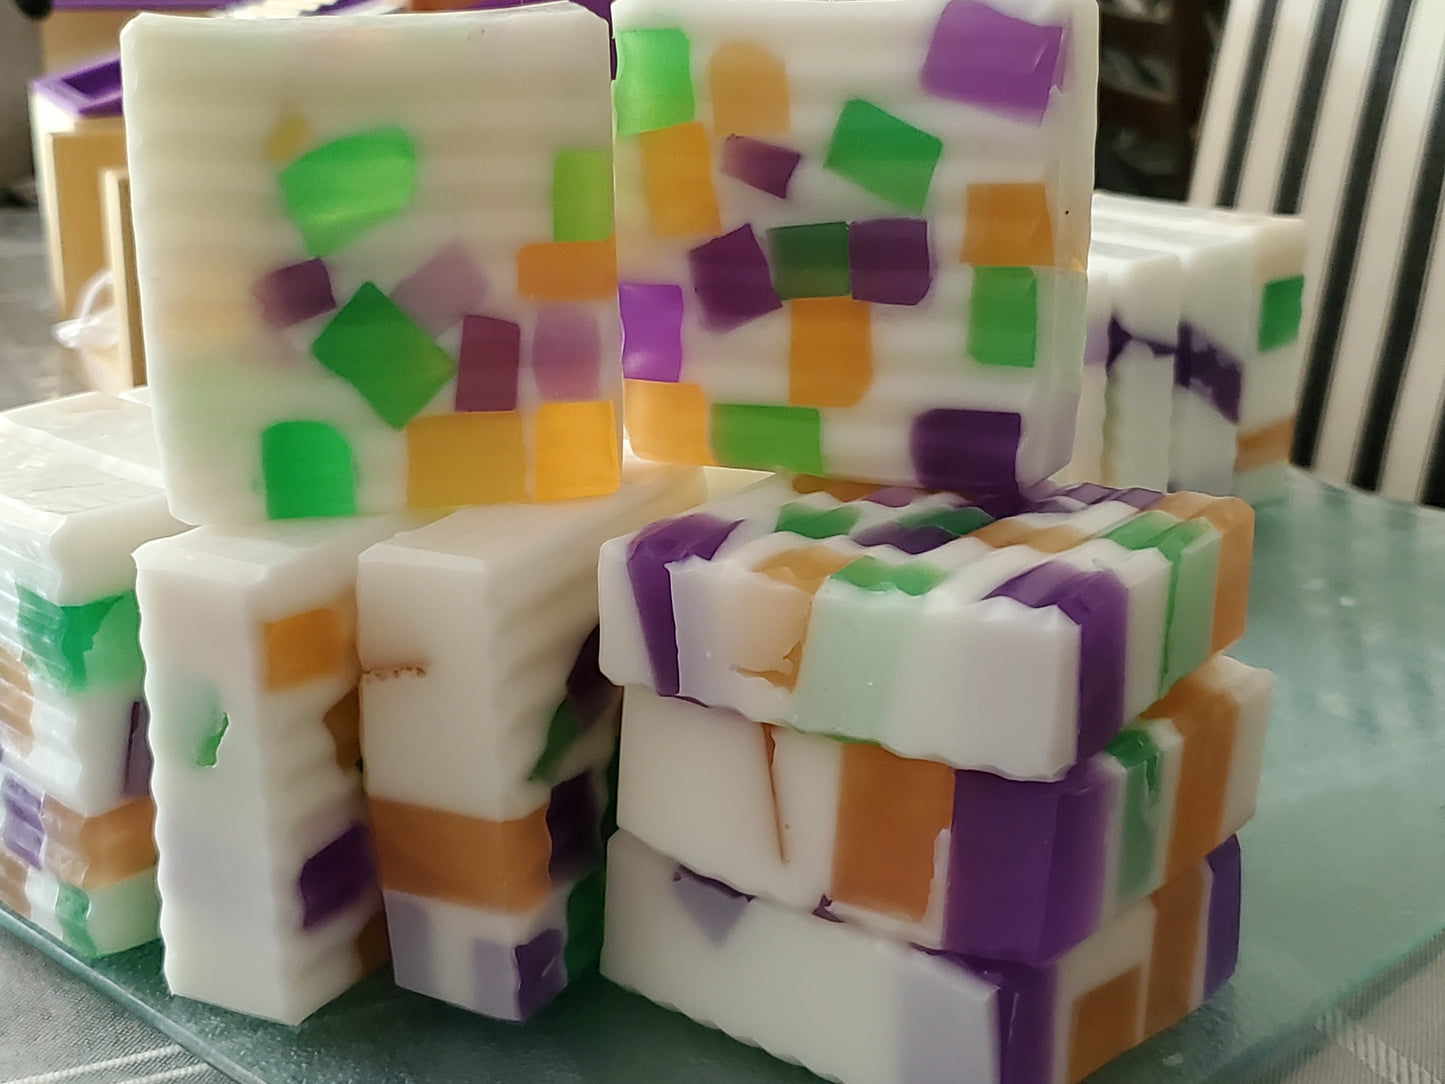 Tropical Passionfruit Shea Butter and Glycerin Soap